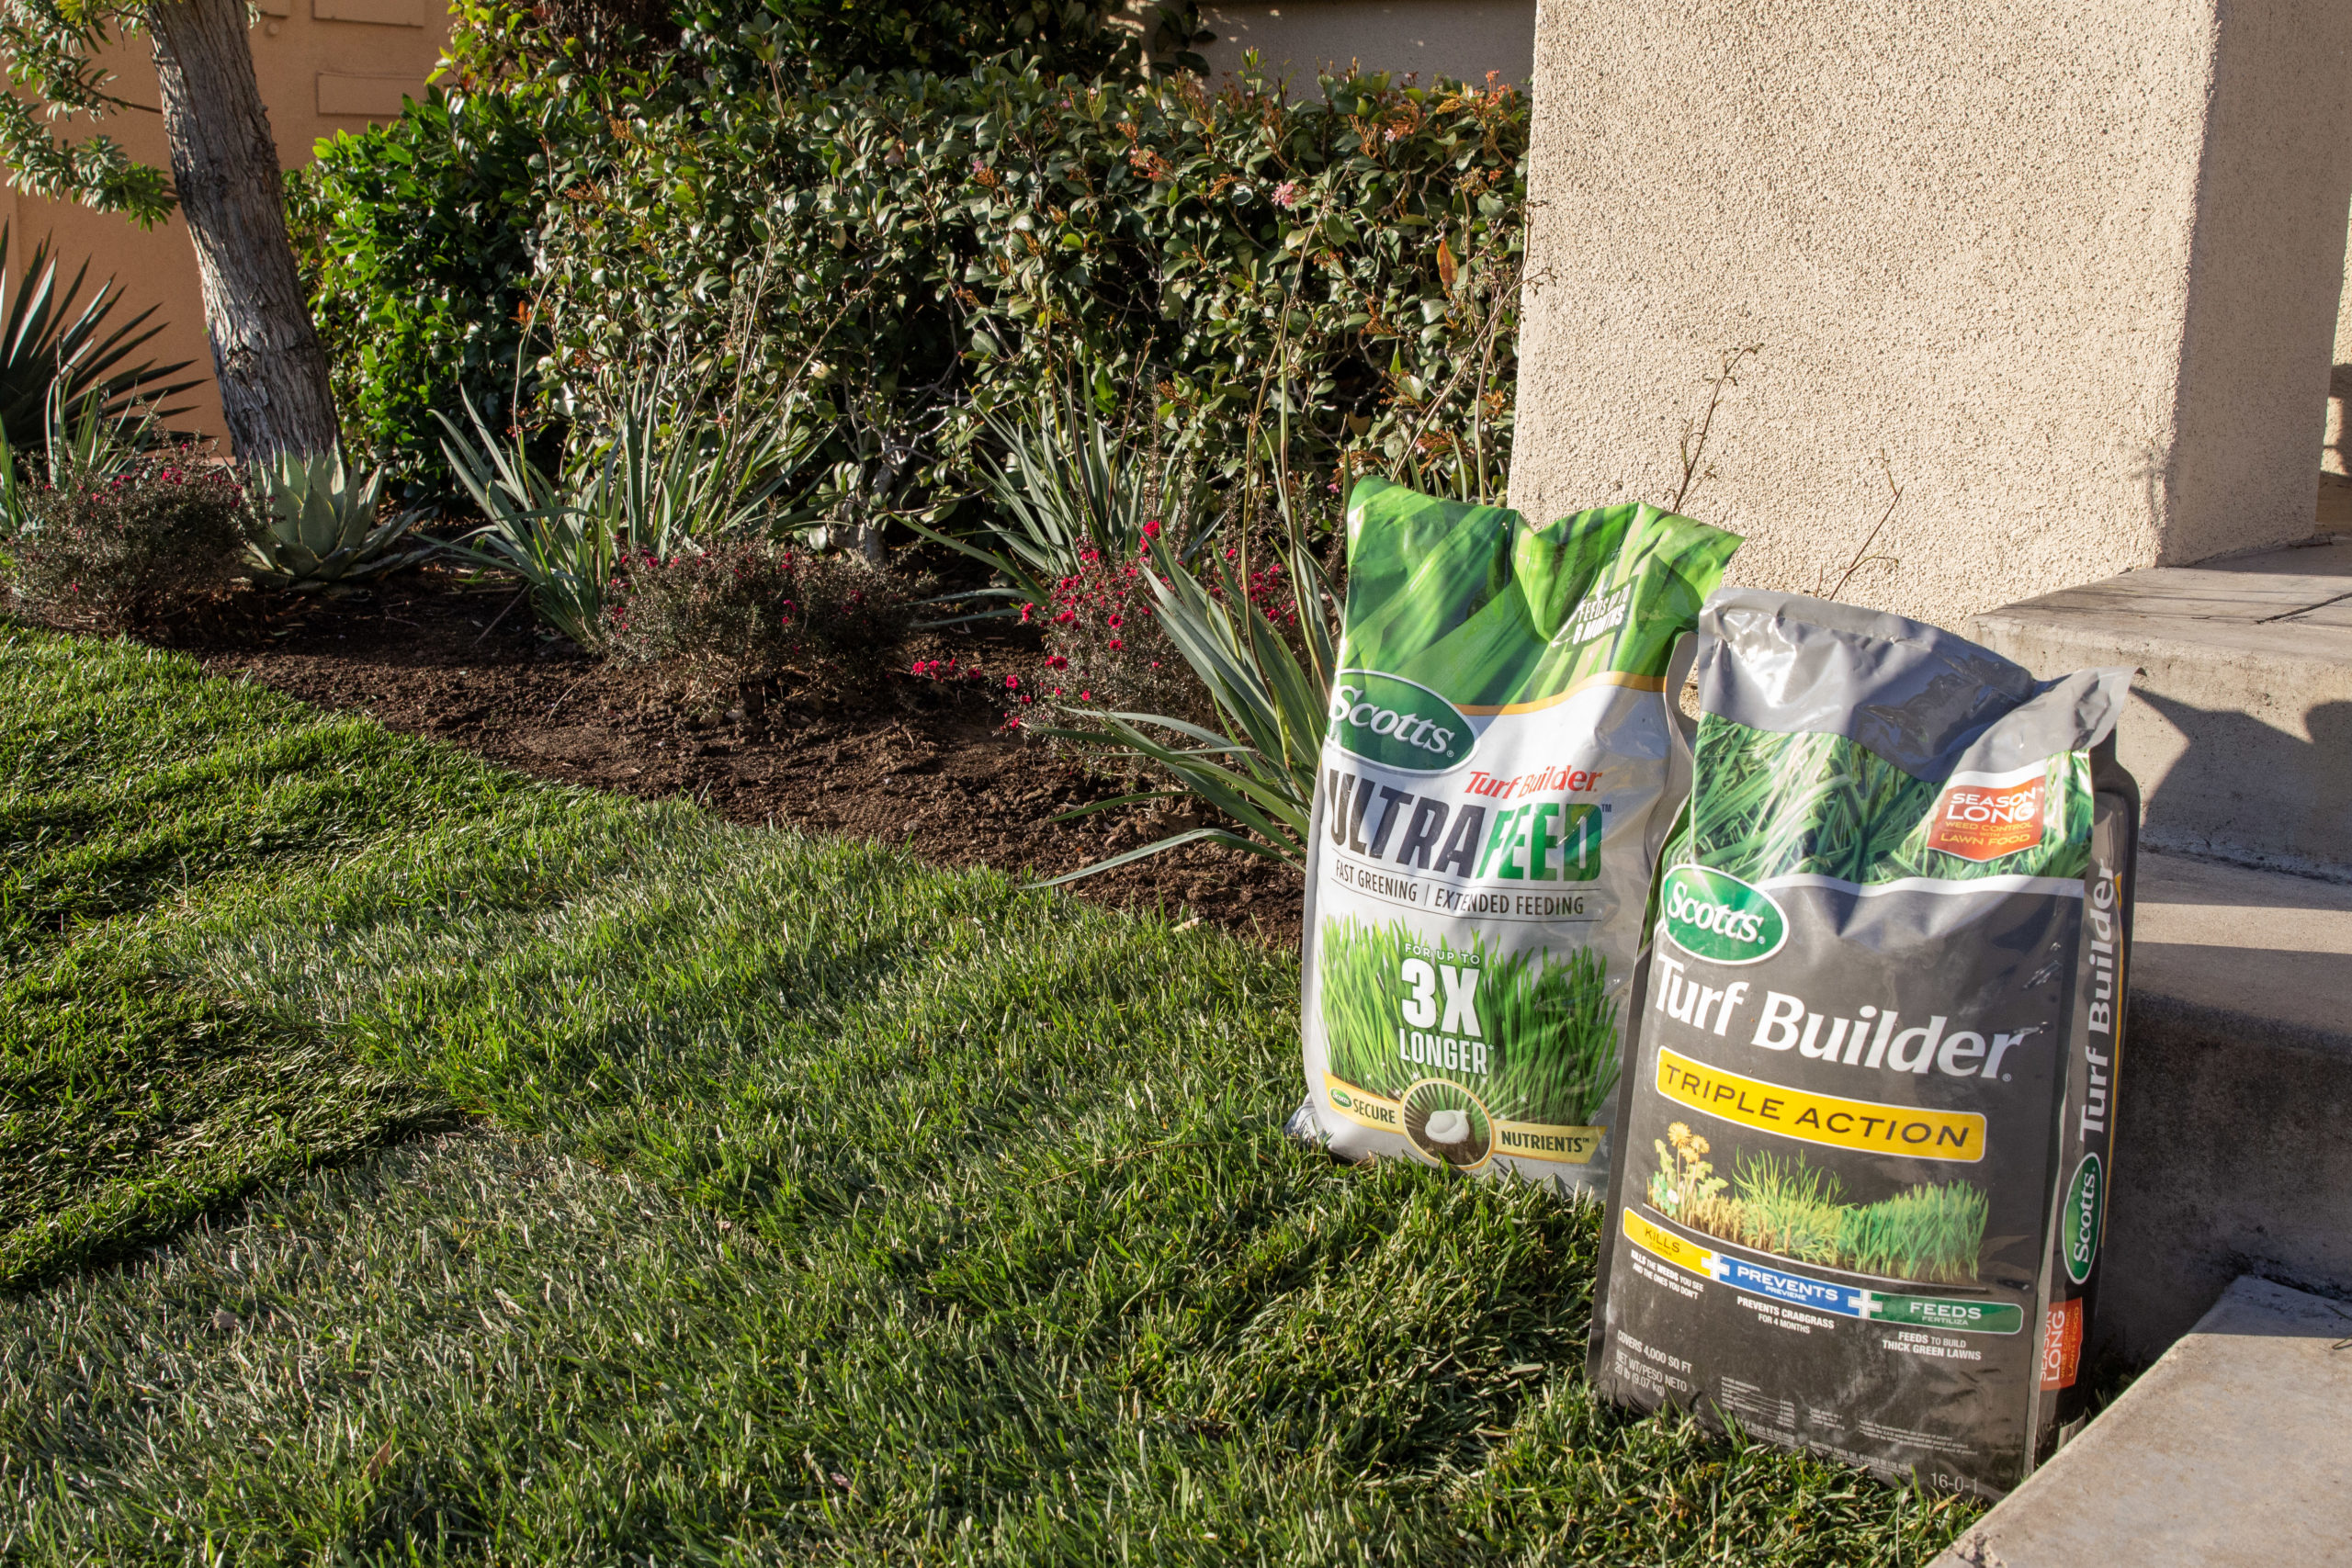 A freshly sodded yard with bags of fertilizer near the landscaping